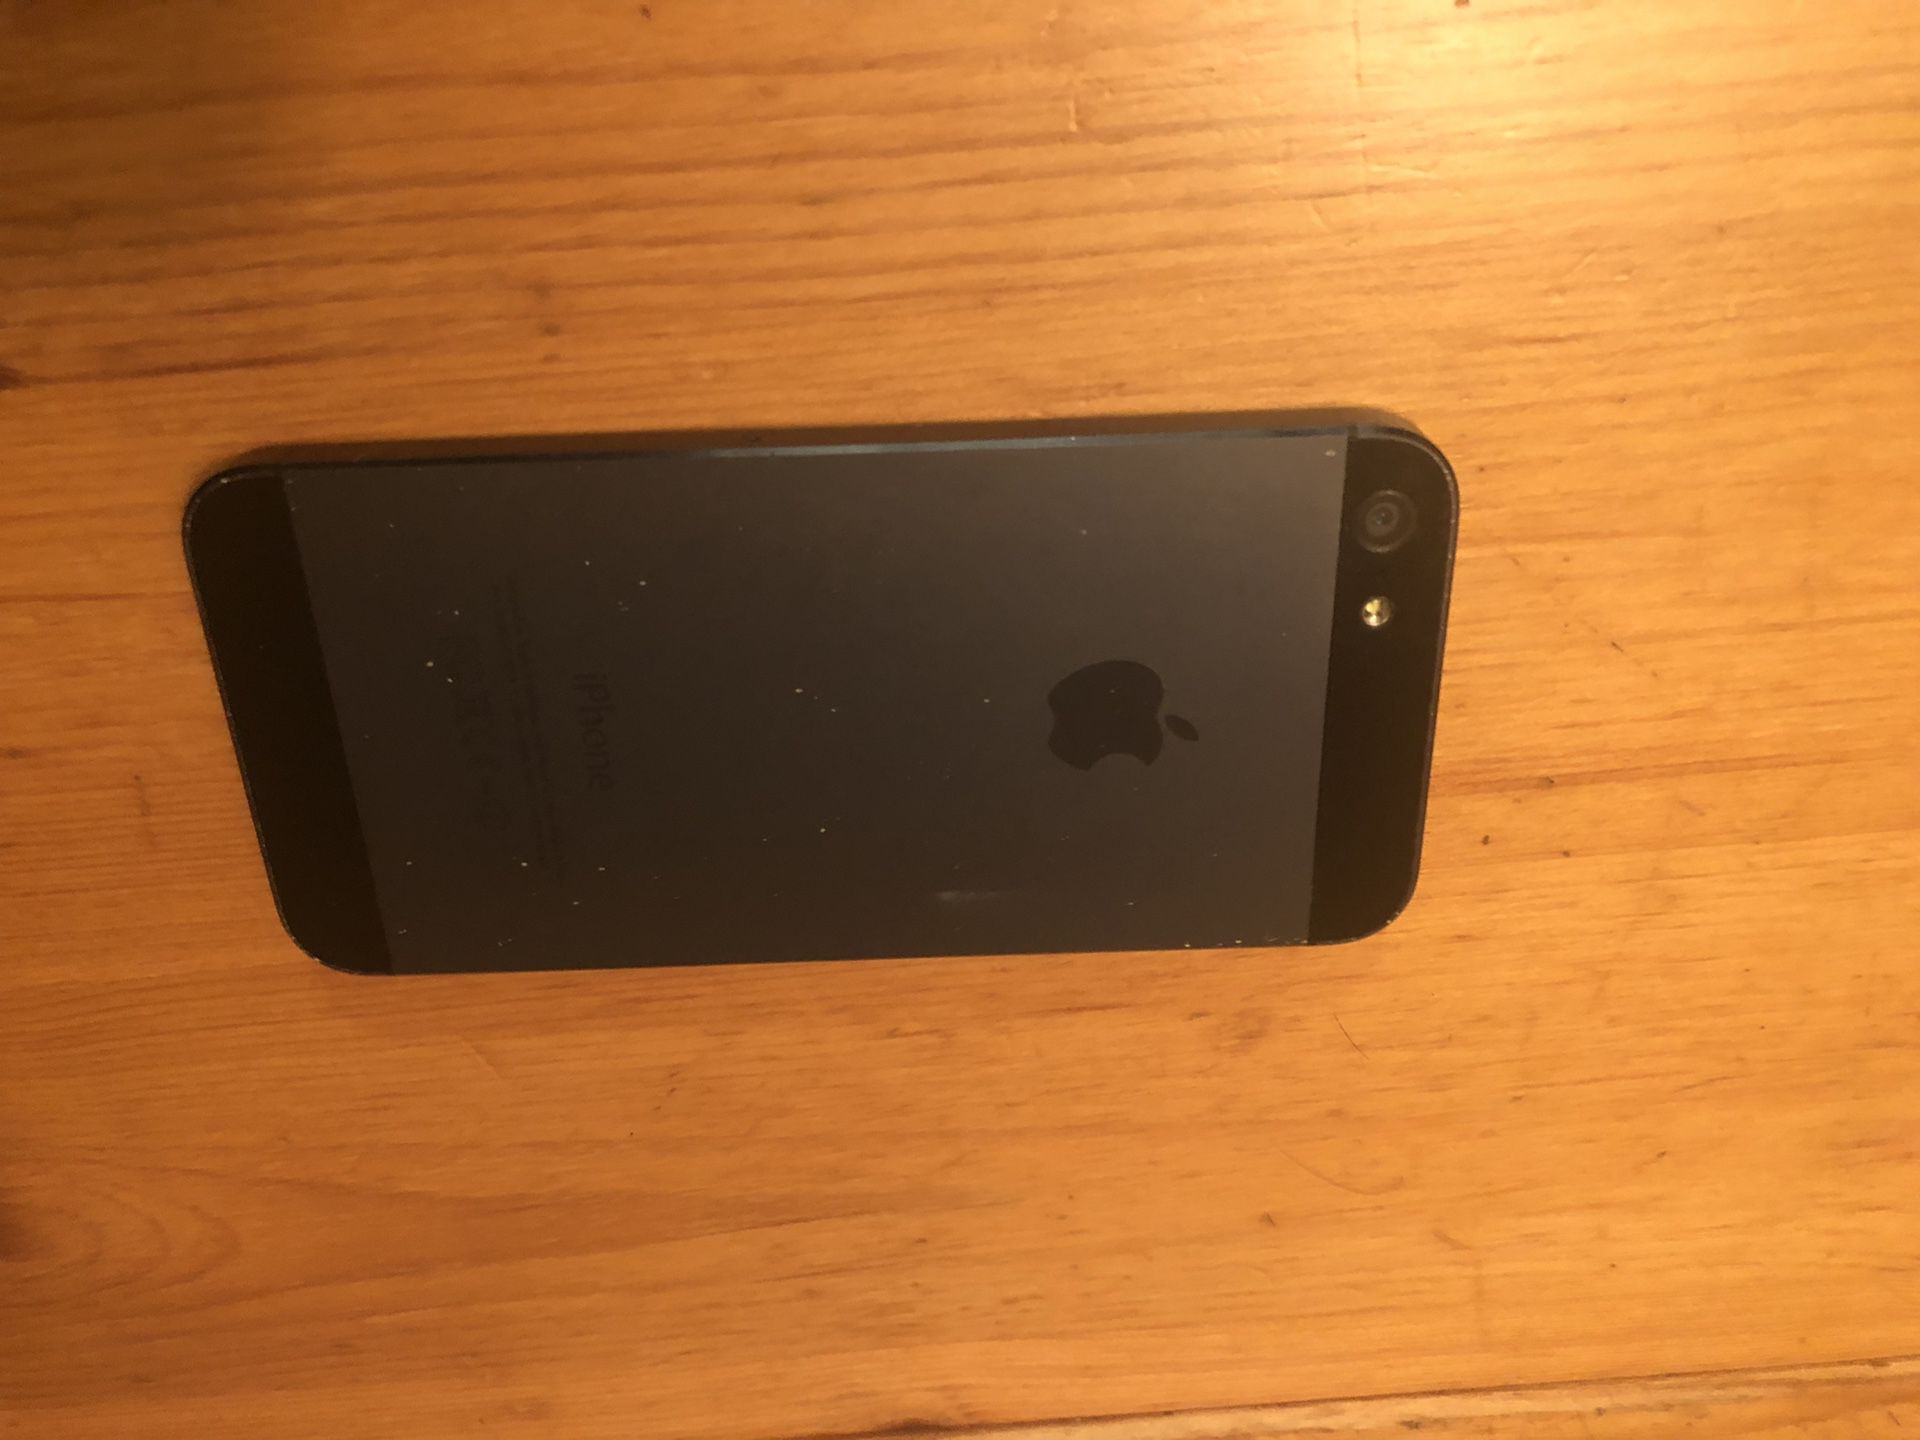 iPhone 5 Space Gray Unlocked with Extras